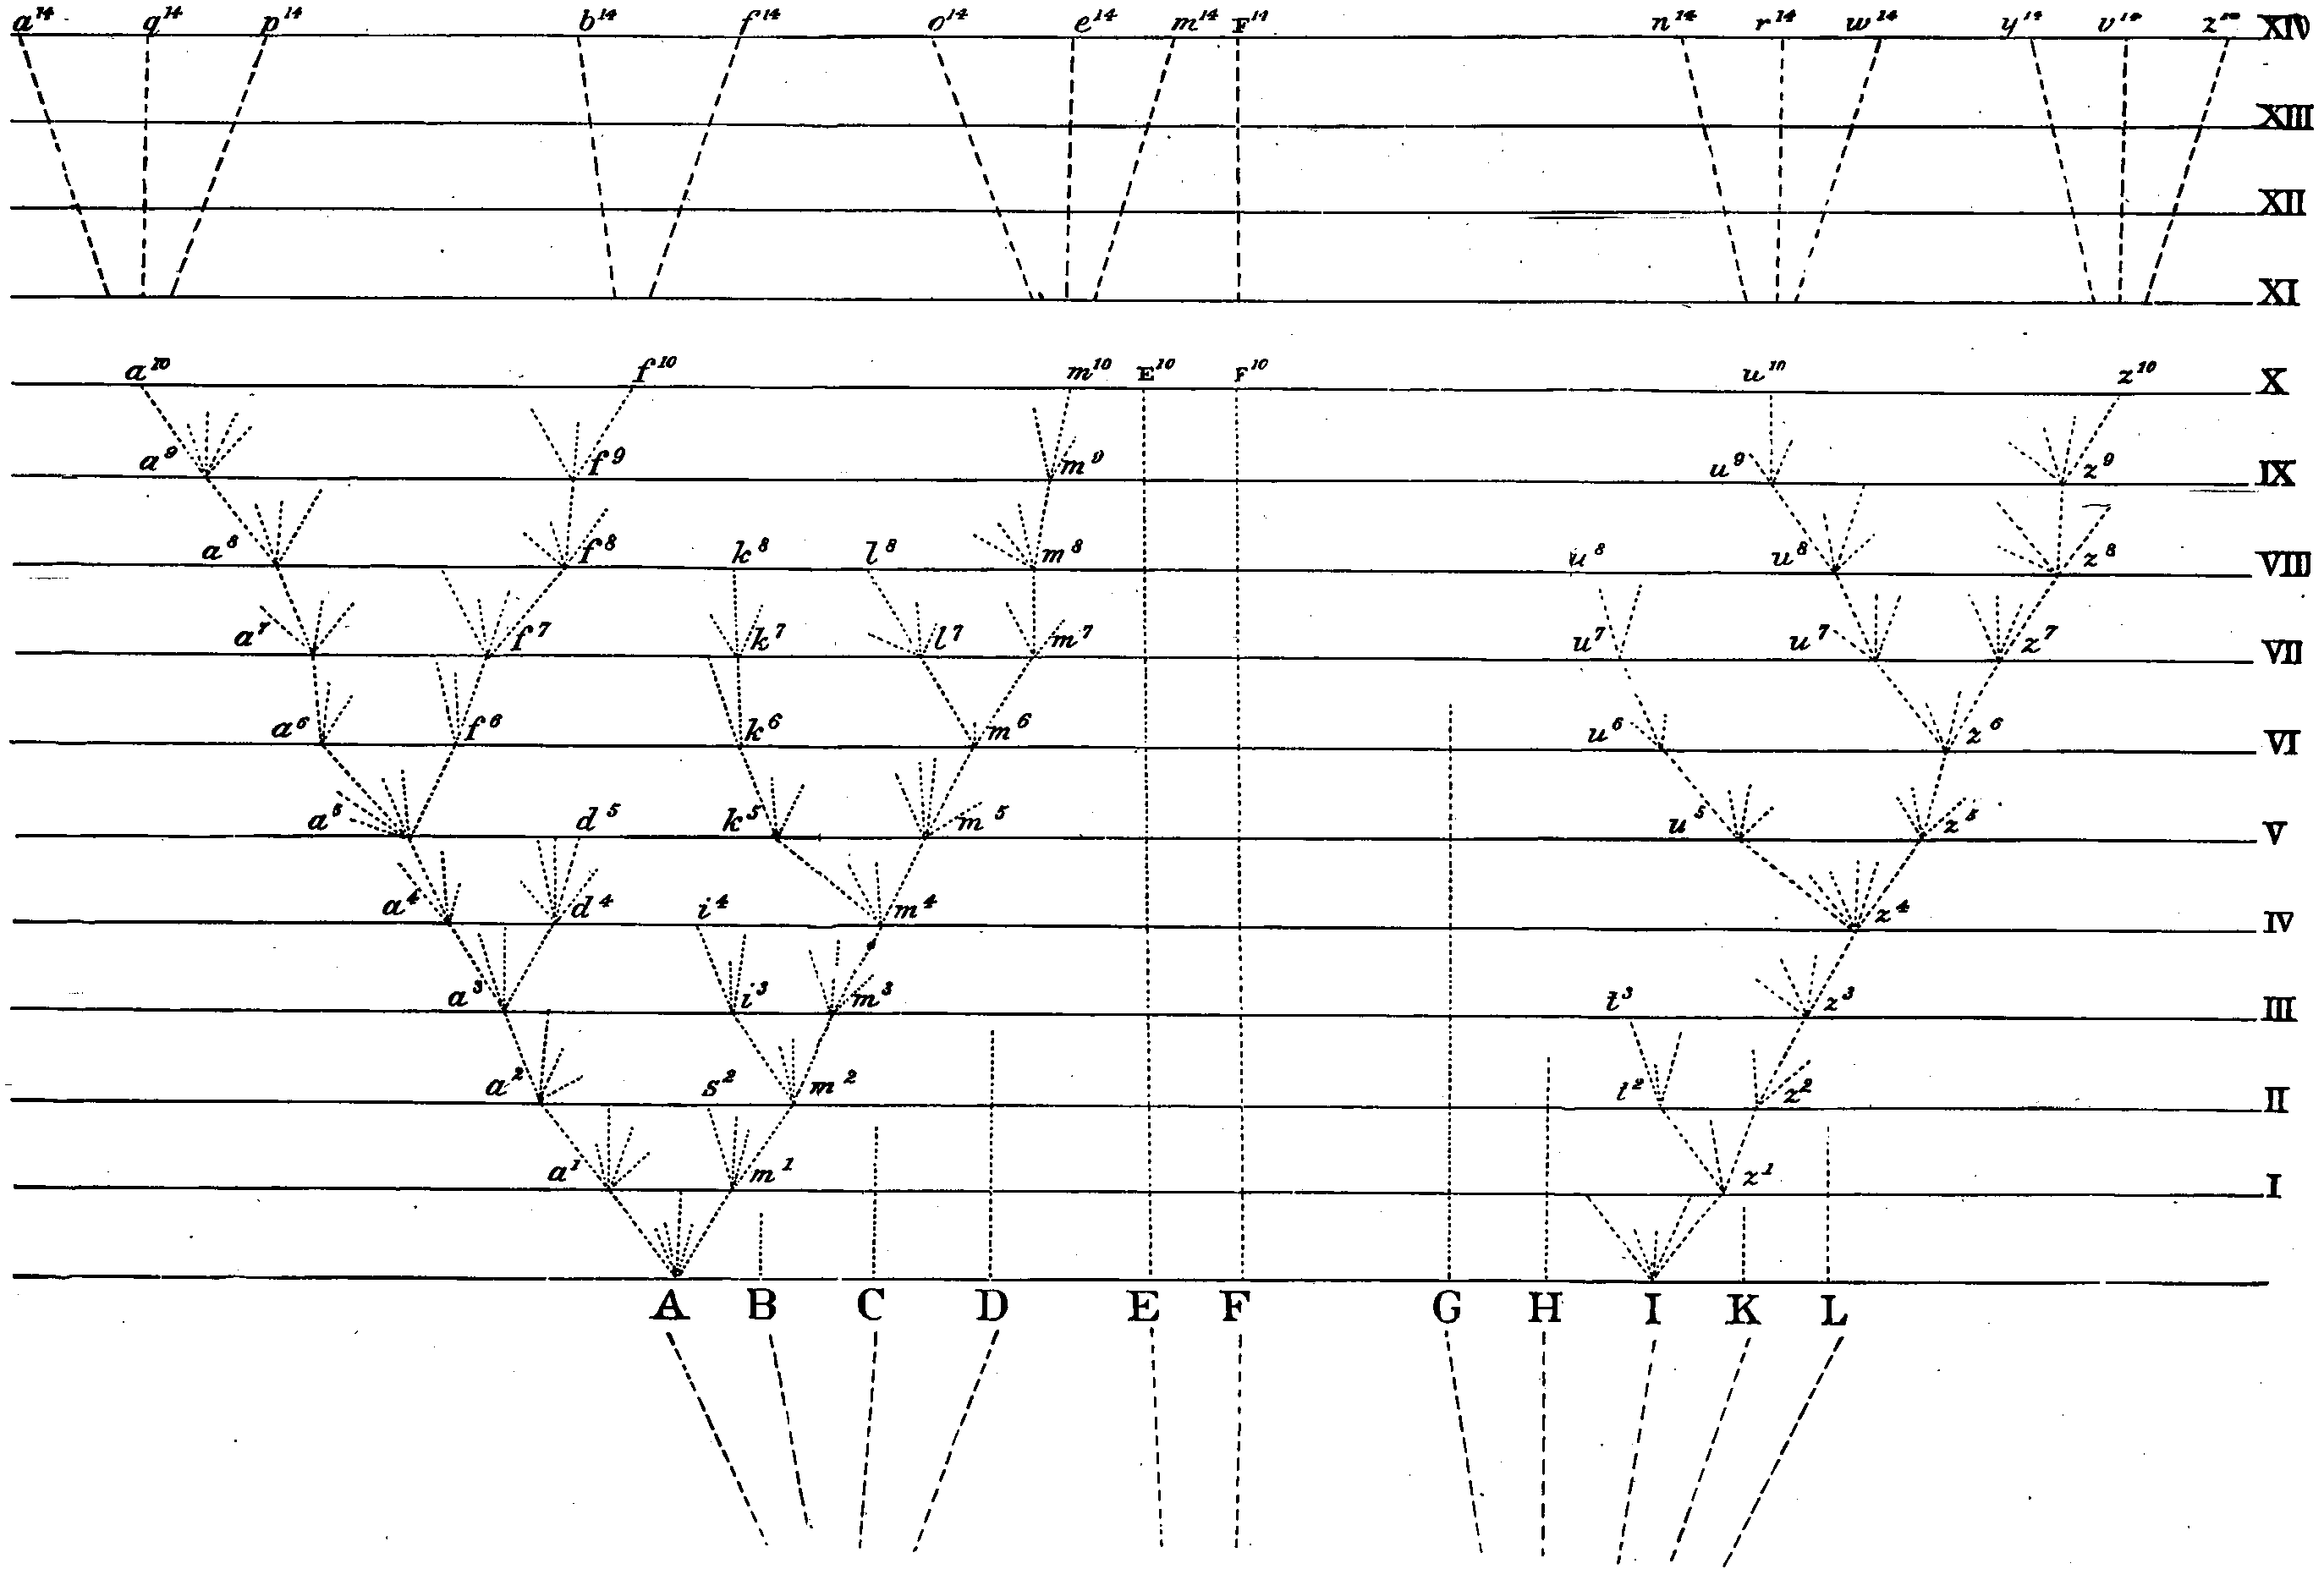 Graph labeled on the horizontal-axis with the letters A to L and on the vertical-axis with Roman numerals I to XIV. From A branch up several dashed lines; all but two stop before reaching vertical-level I; from those two branch up several more dashed lines, some stop before the next vertical-level those that don’t sprout up more lines, repeat though in some cases no line from a particular branch reaches the next vertical-level. Further description in the text following.